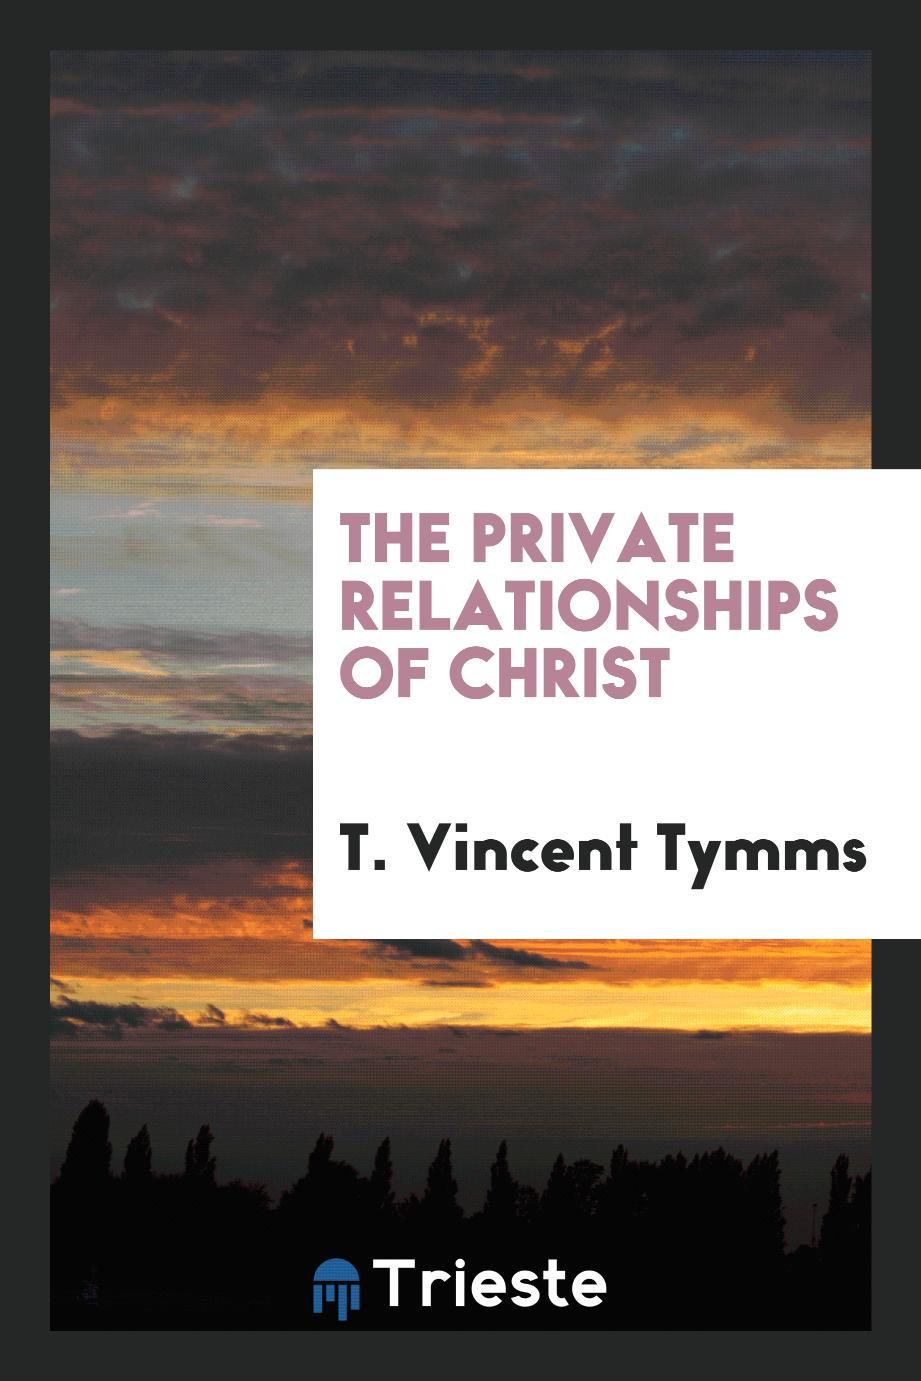 The private relationships of Christ